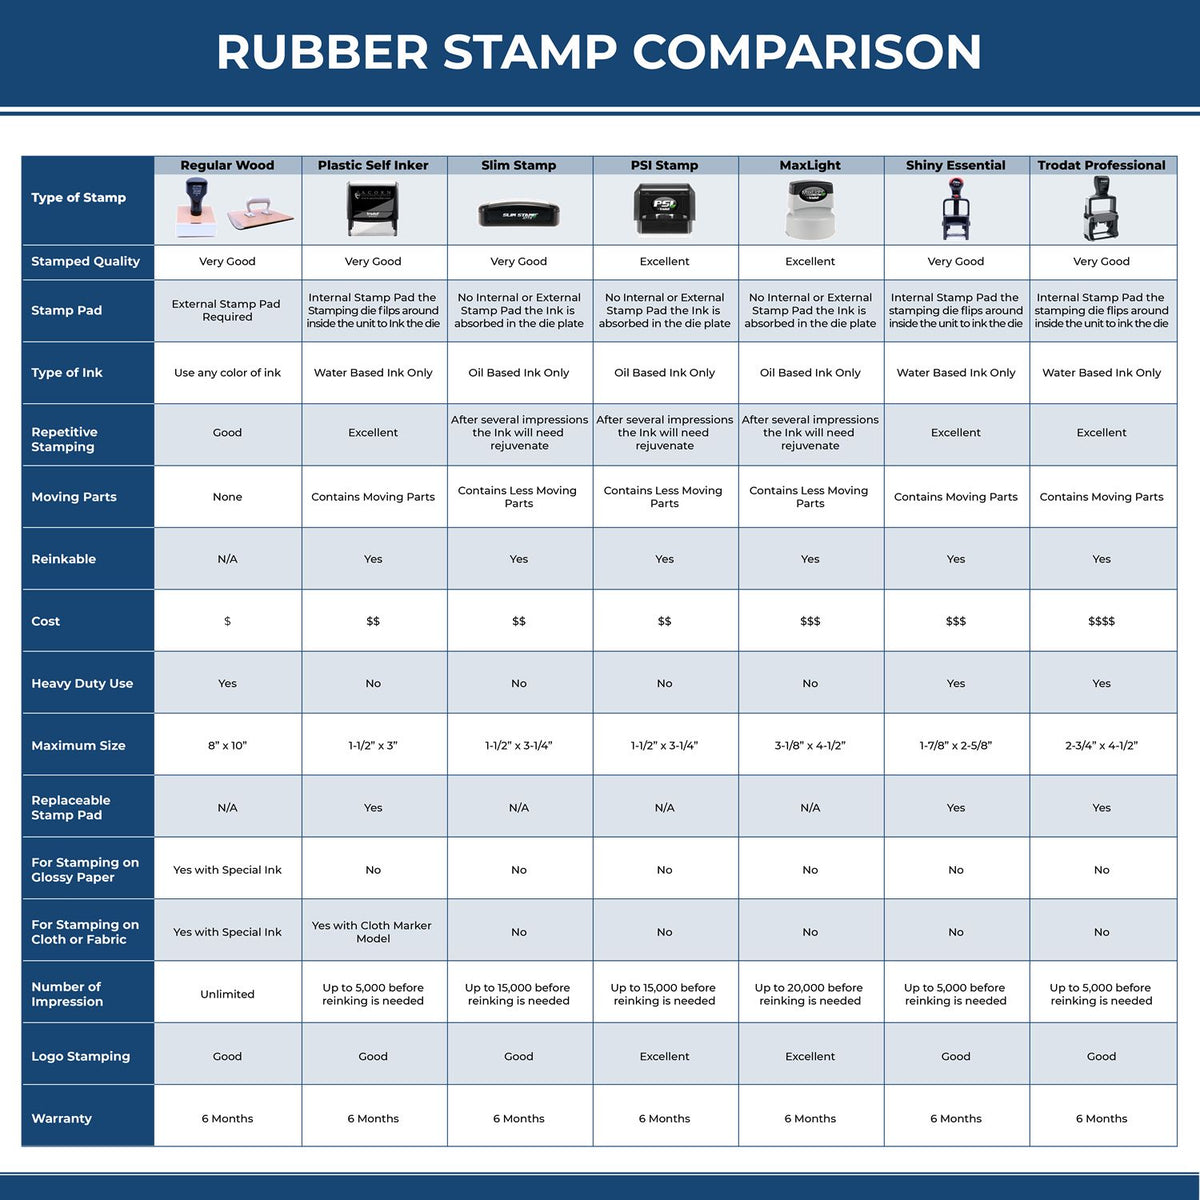 A comparison chart for the different types of mount models available for the Slim Pre-Inked New York Professional Engineer Seal Stamp.